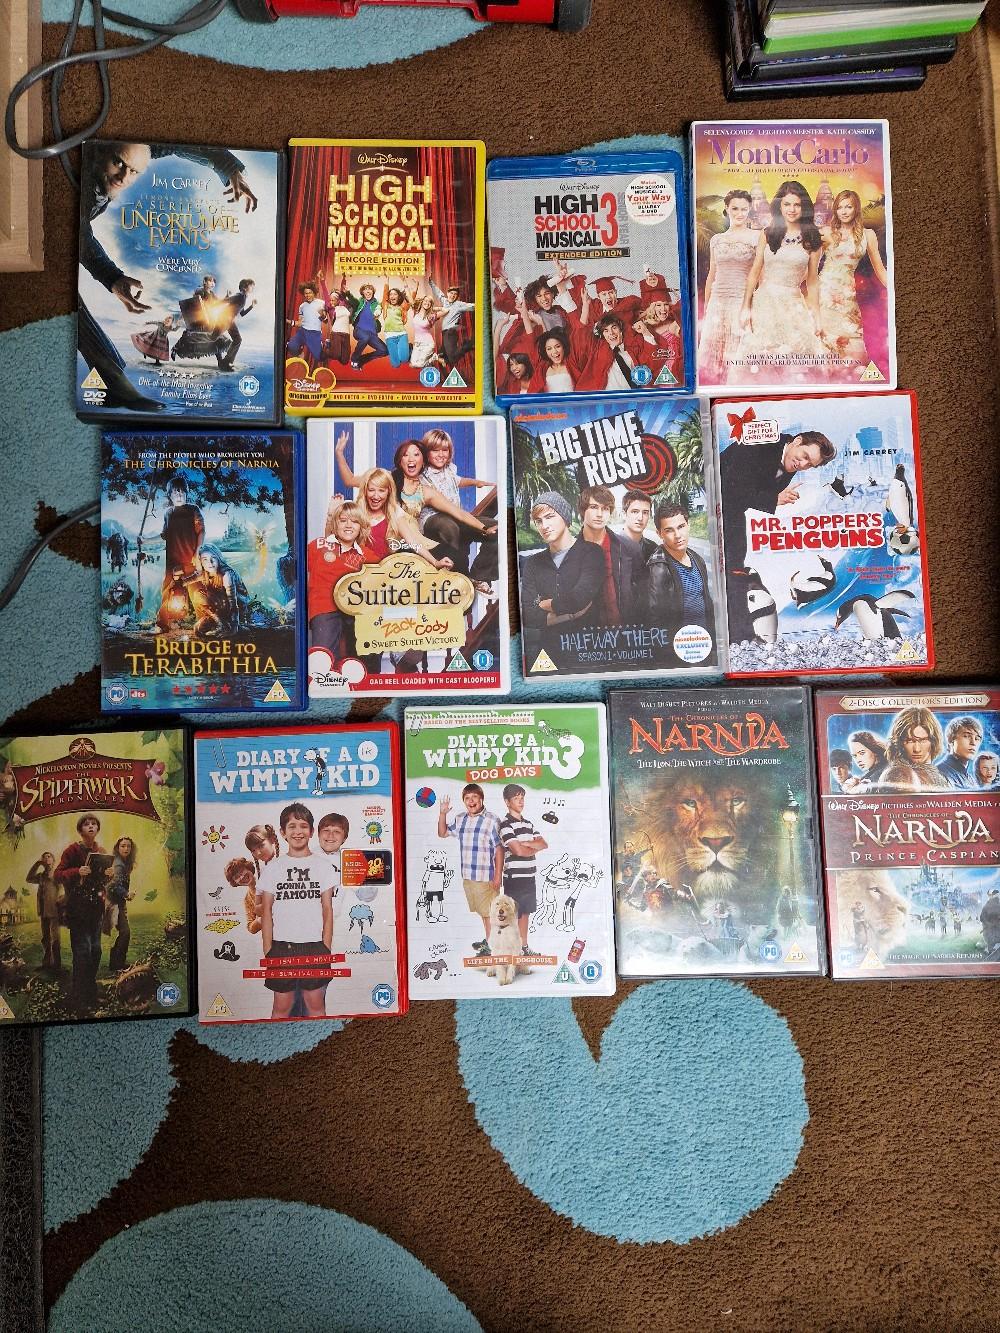 DVDS for Sale | DVD & Blu-ray in Shpock